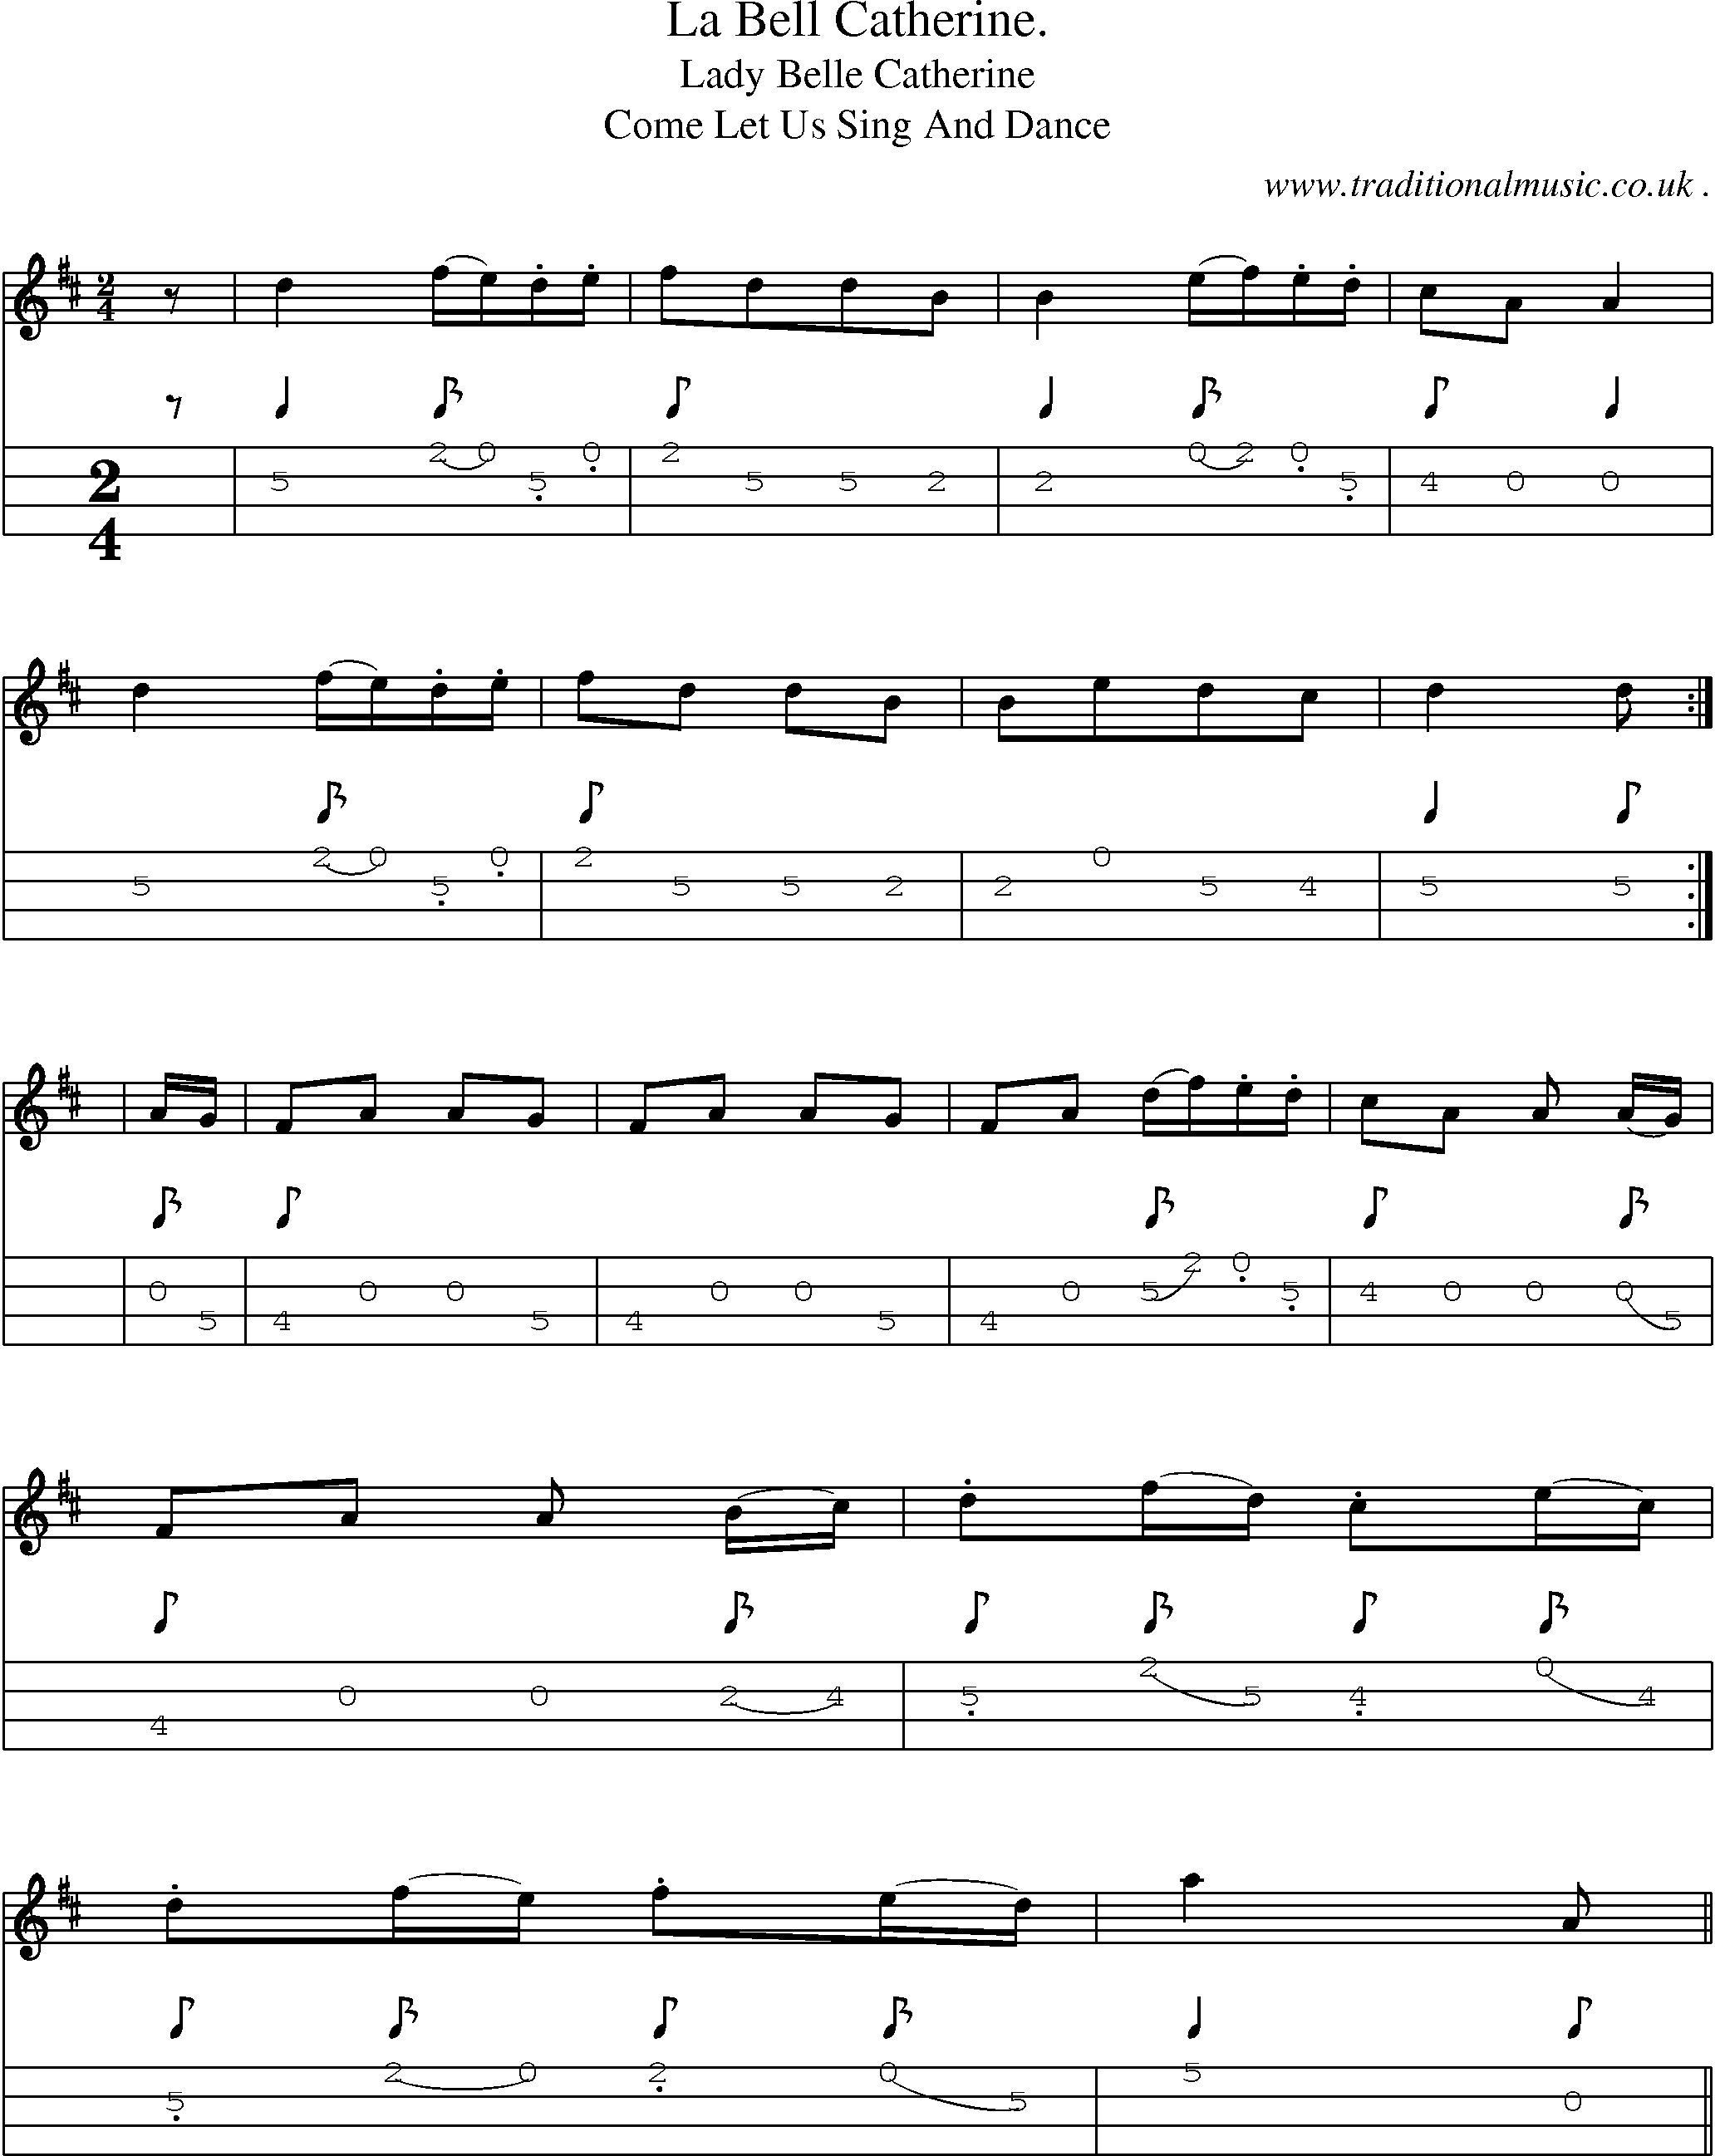 Sheet-Music and Mandolin Tabs for La Bell Catherine